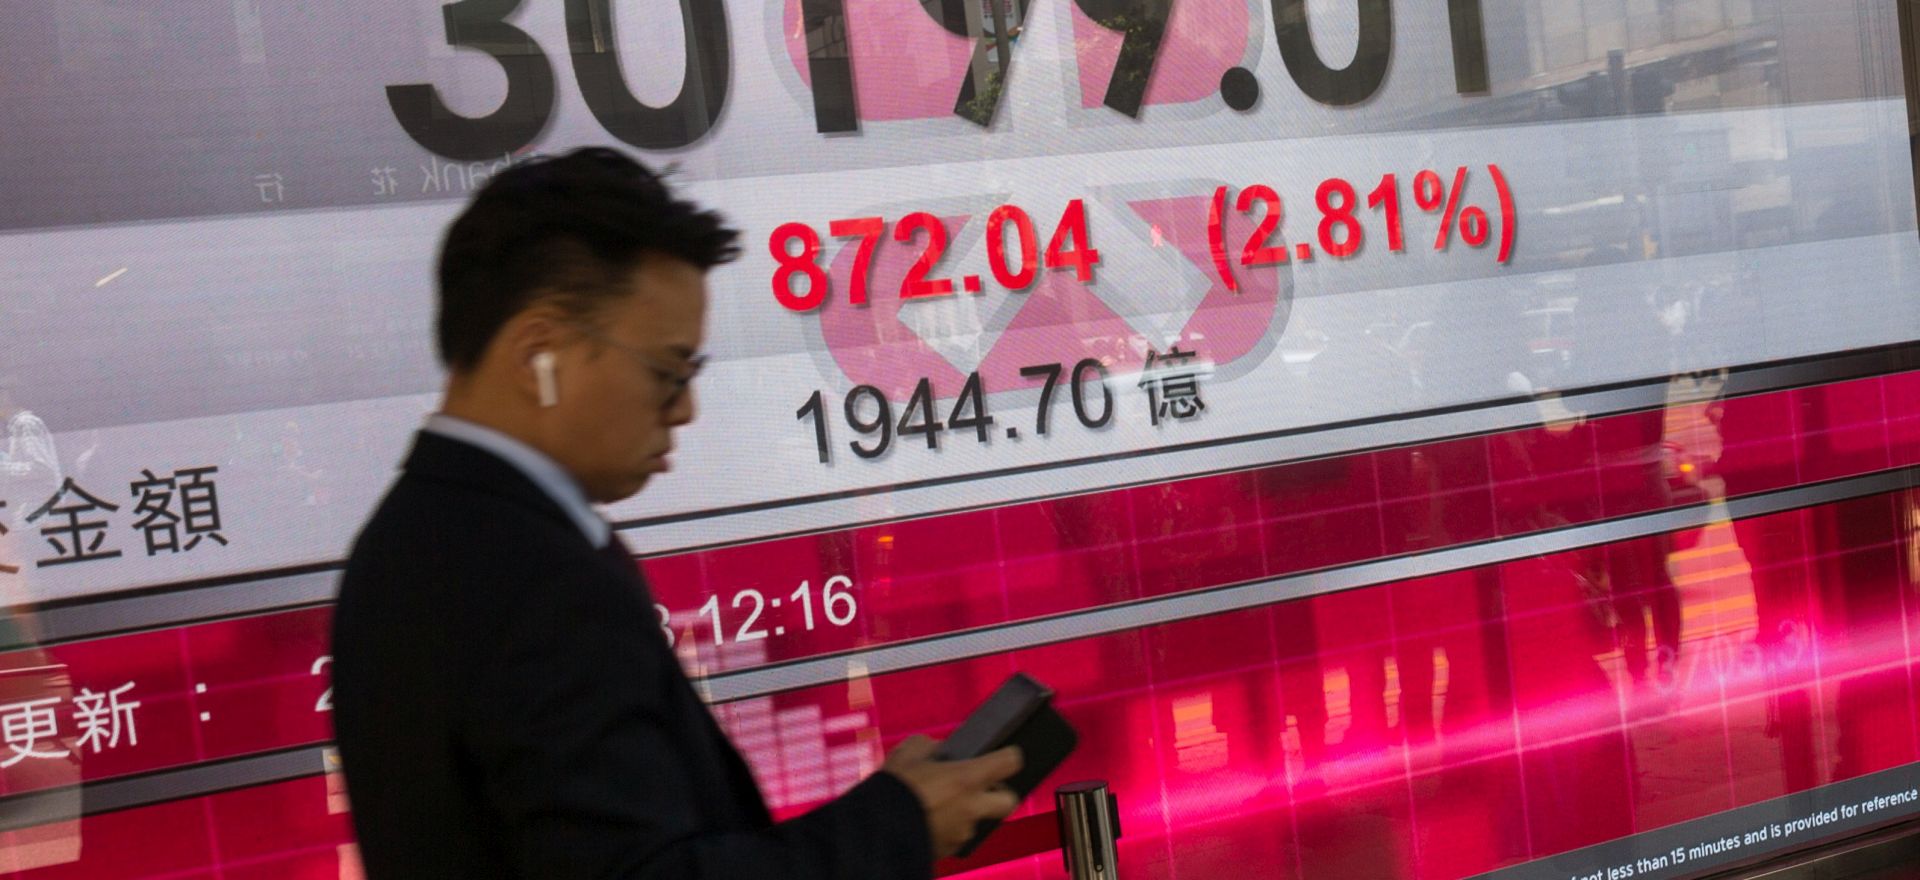 epa06622448 A man walks past an electronic board showing the Hang Seng Index figure in Hong Kong, China, 23 March 2018. Hong Kong and Chinese stock markets were hammered before mid-day by fears of a trade war after Donald Trump imposed sanctions on billions of dollars worth of Chinese goods and Beijing unveiled a tit-for-tat list.  EPA/JEROME FAVRE